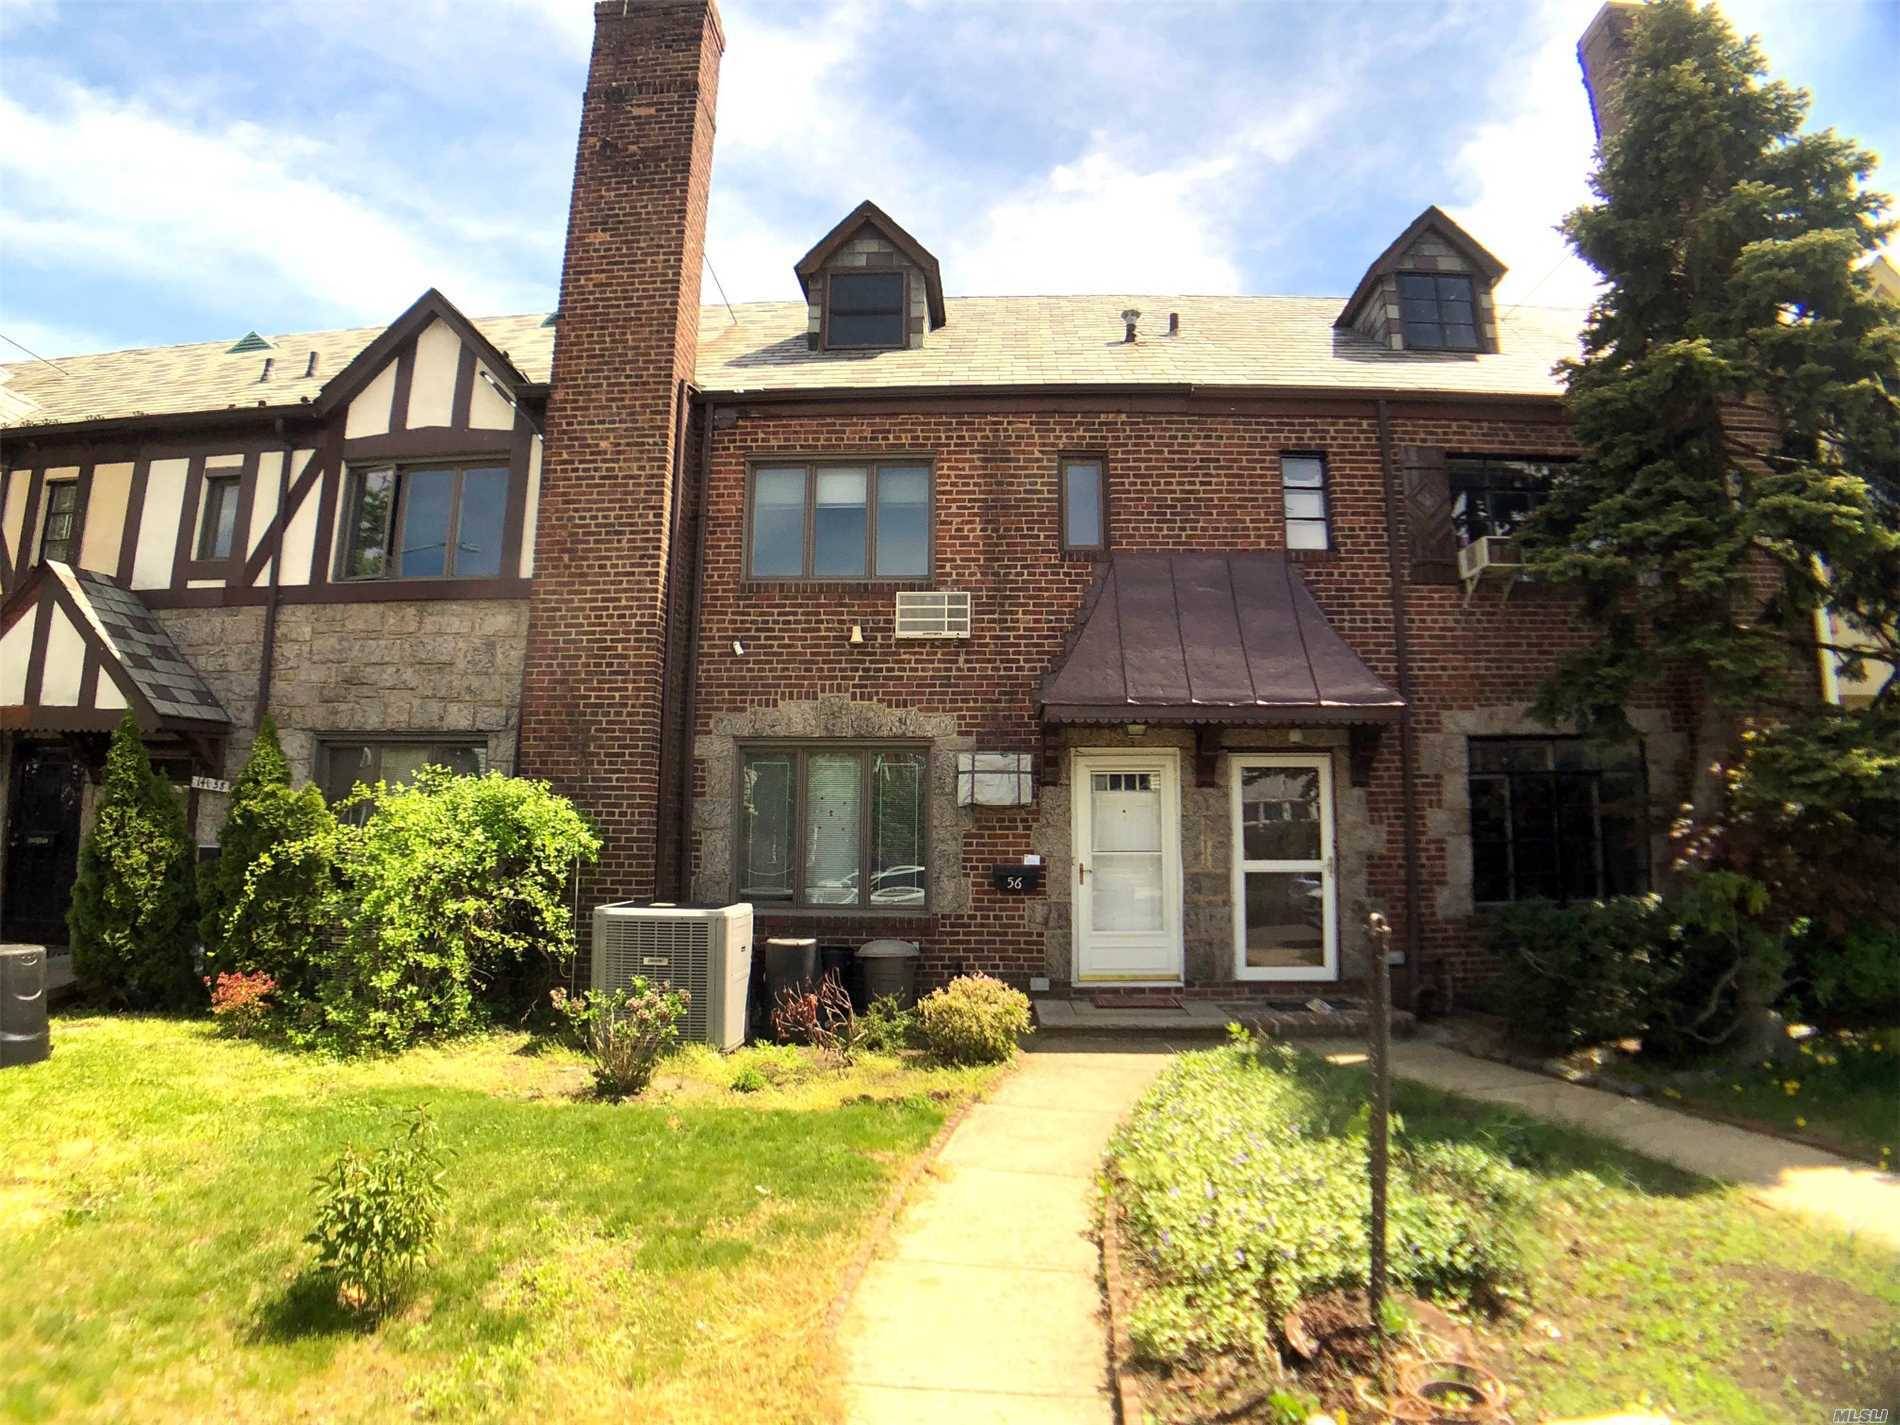 Beautifully Updated 18' Attached Brick House Located In The Heart Of Kew Garden Hills.